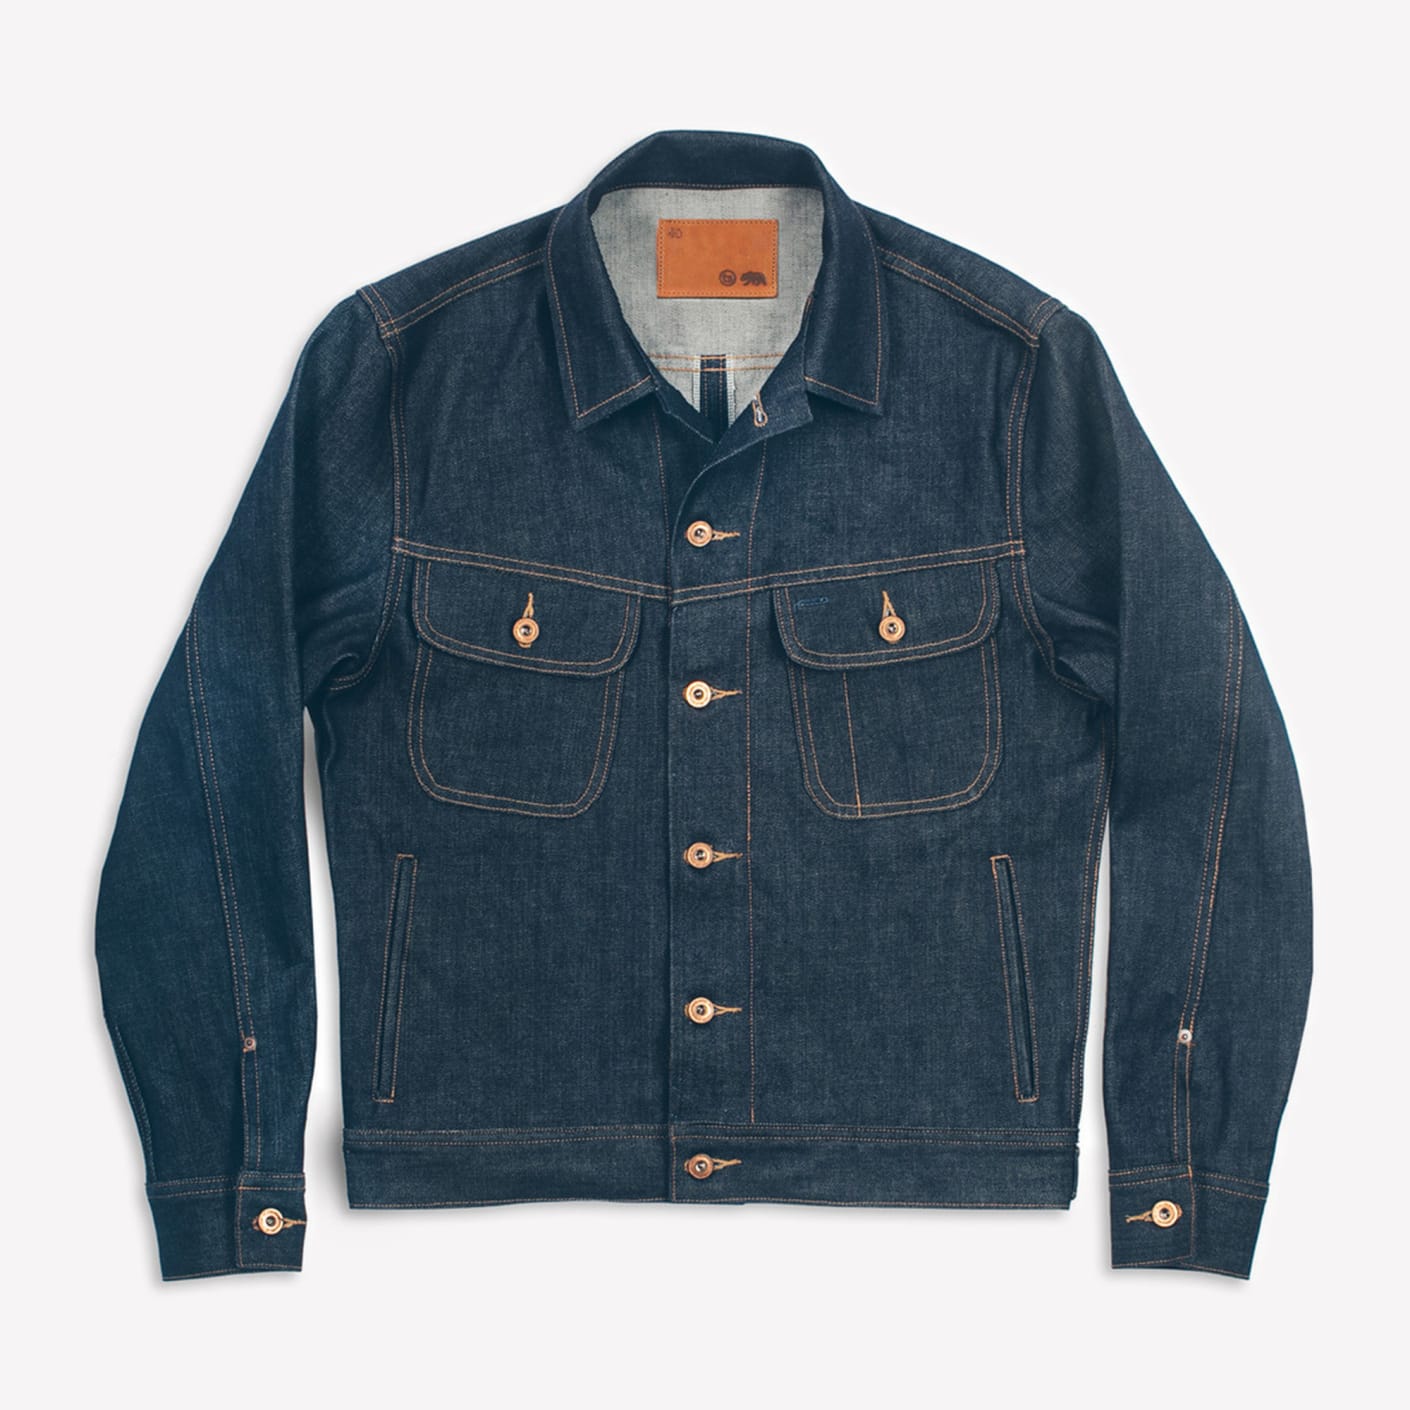 Taylor Stitch, The Long Haul Jacket in Cone Mills '68 Selvage